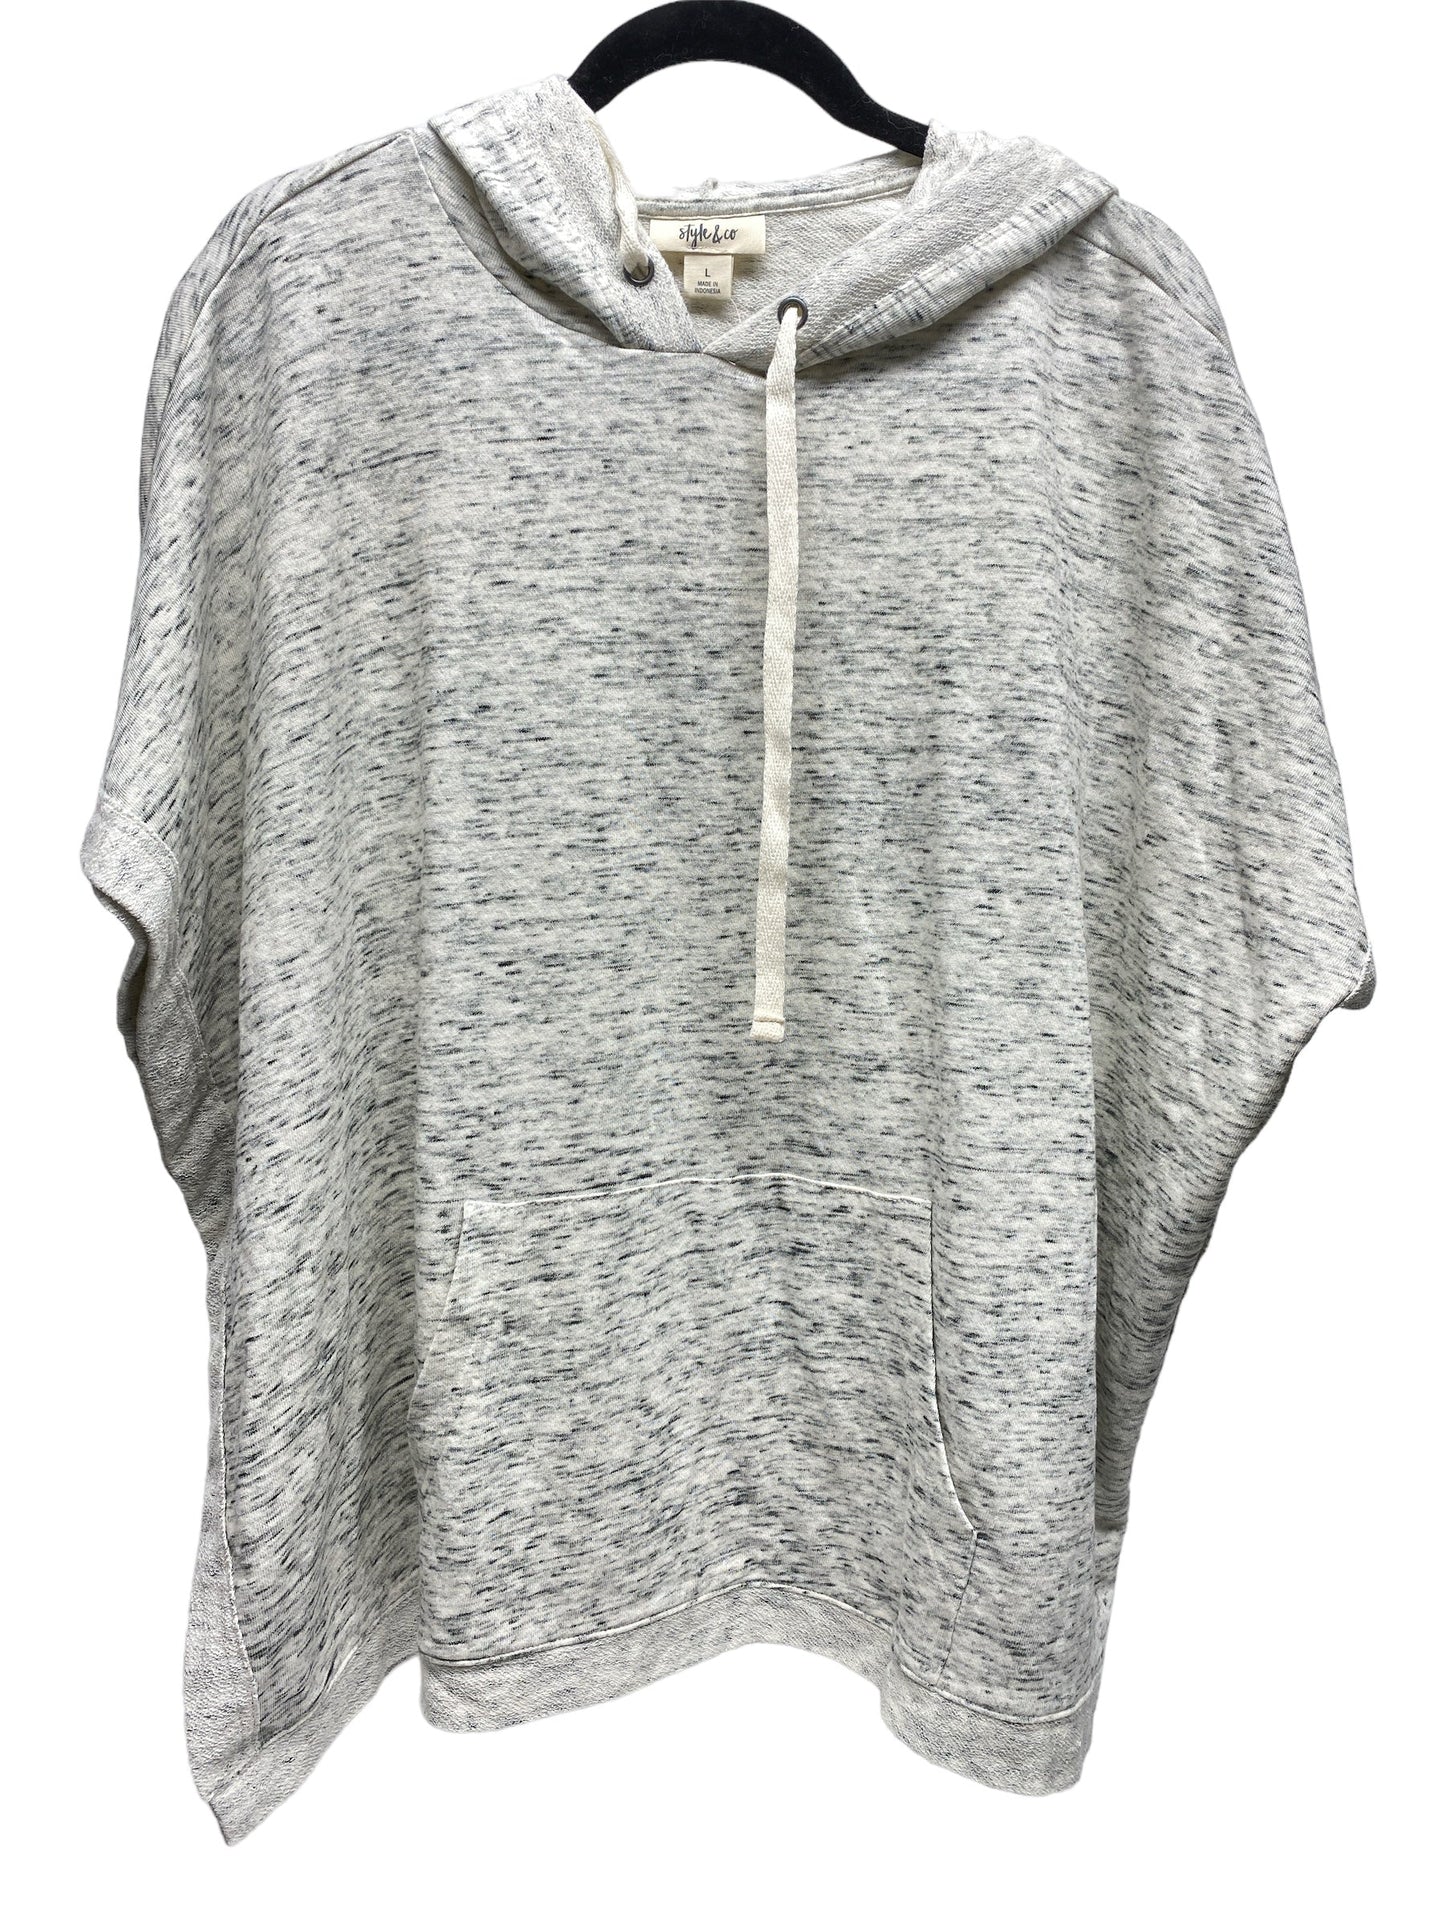 Sweatshirt Hoodie By Style And Company  Size: L